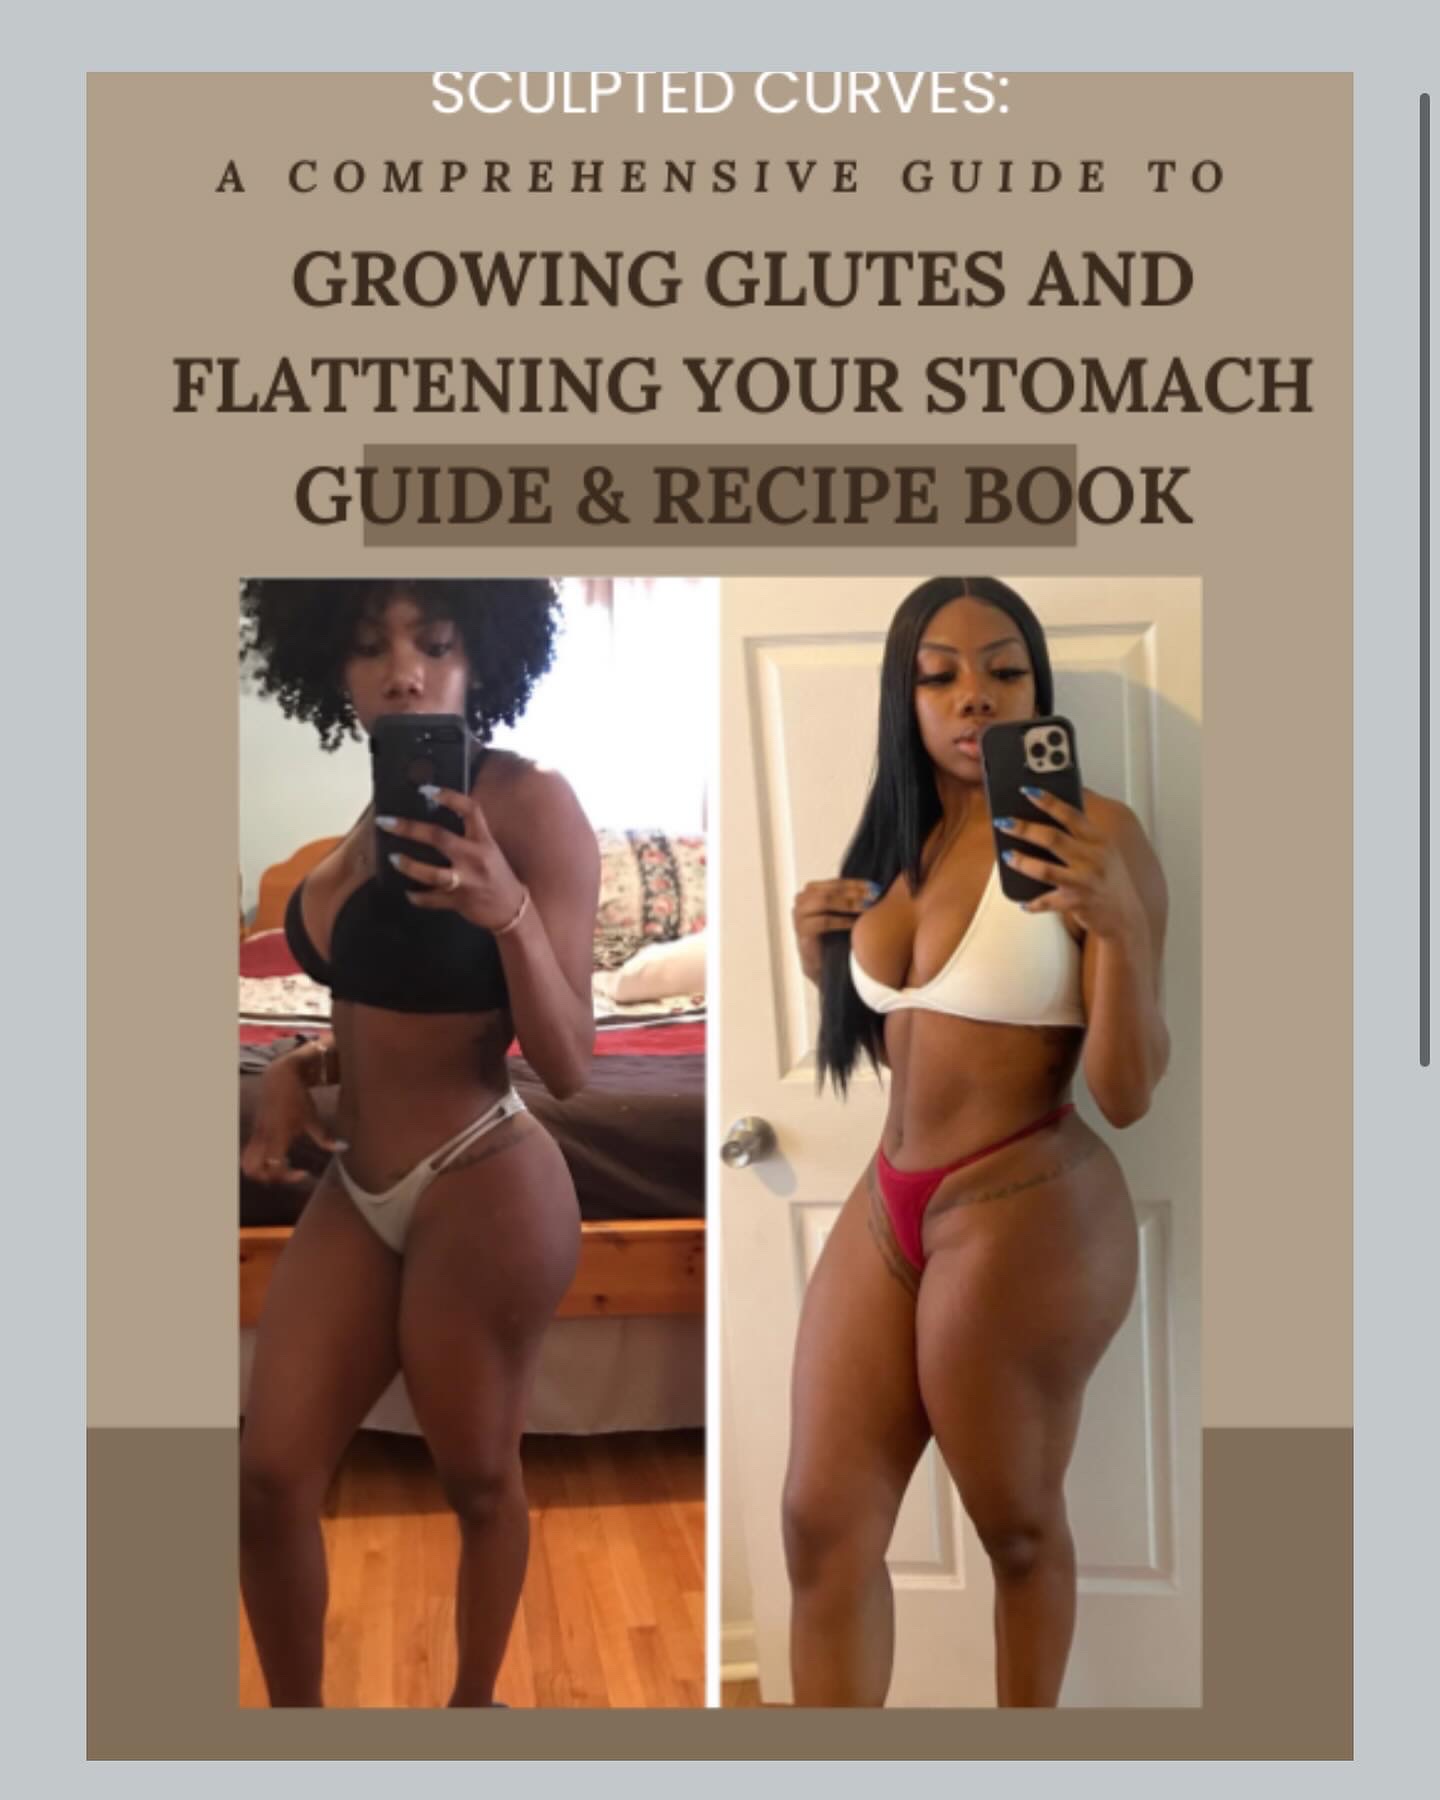 THE ULTIMATE SECRET TO GROWING GLUTES AND A FLAT STOMACH GUIDE thumbnail